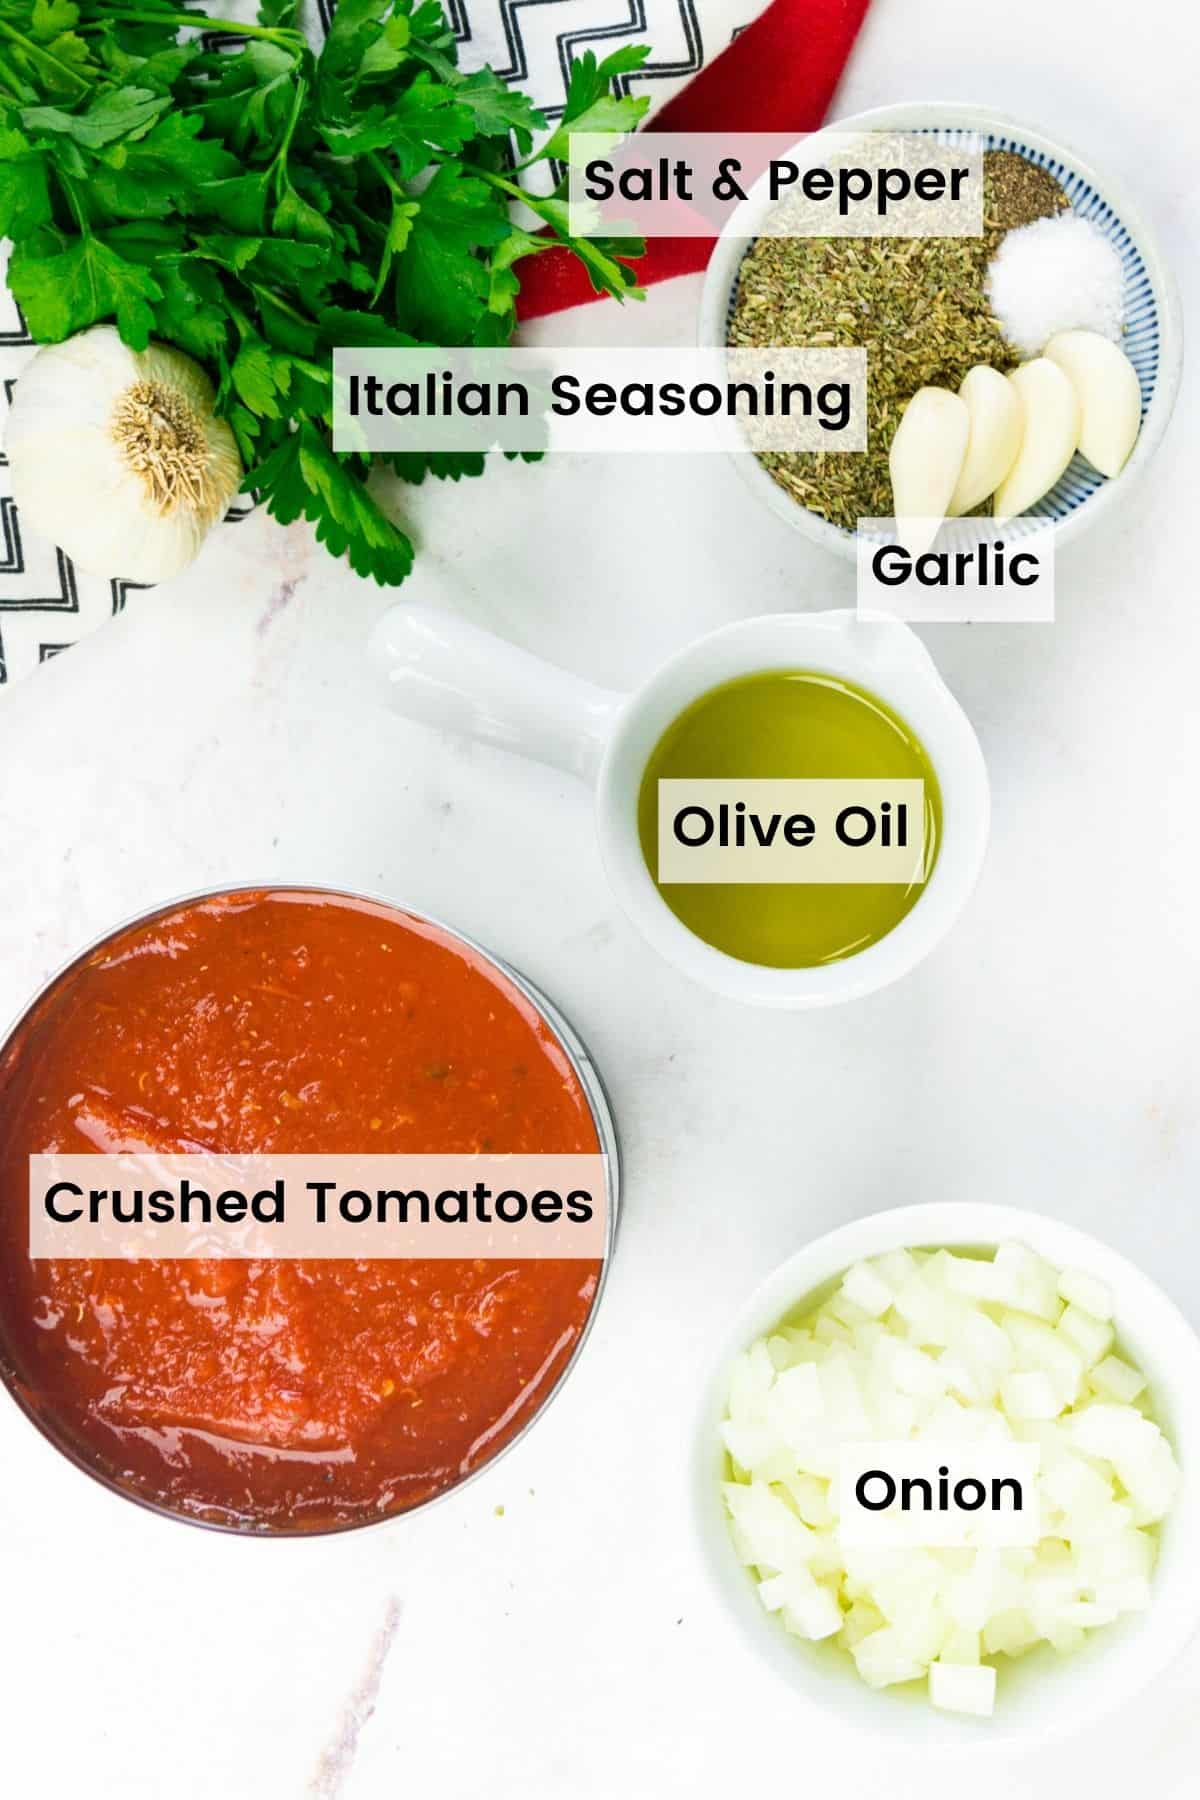 Tomato sauce ingredients are shown: crushed tomatoes, onion, garlic, oil, salt and pepper, seasonings.